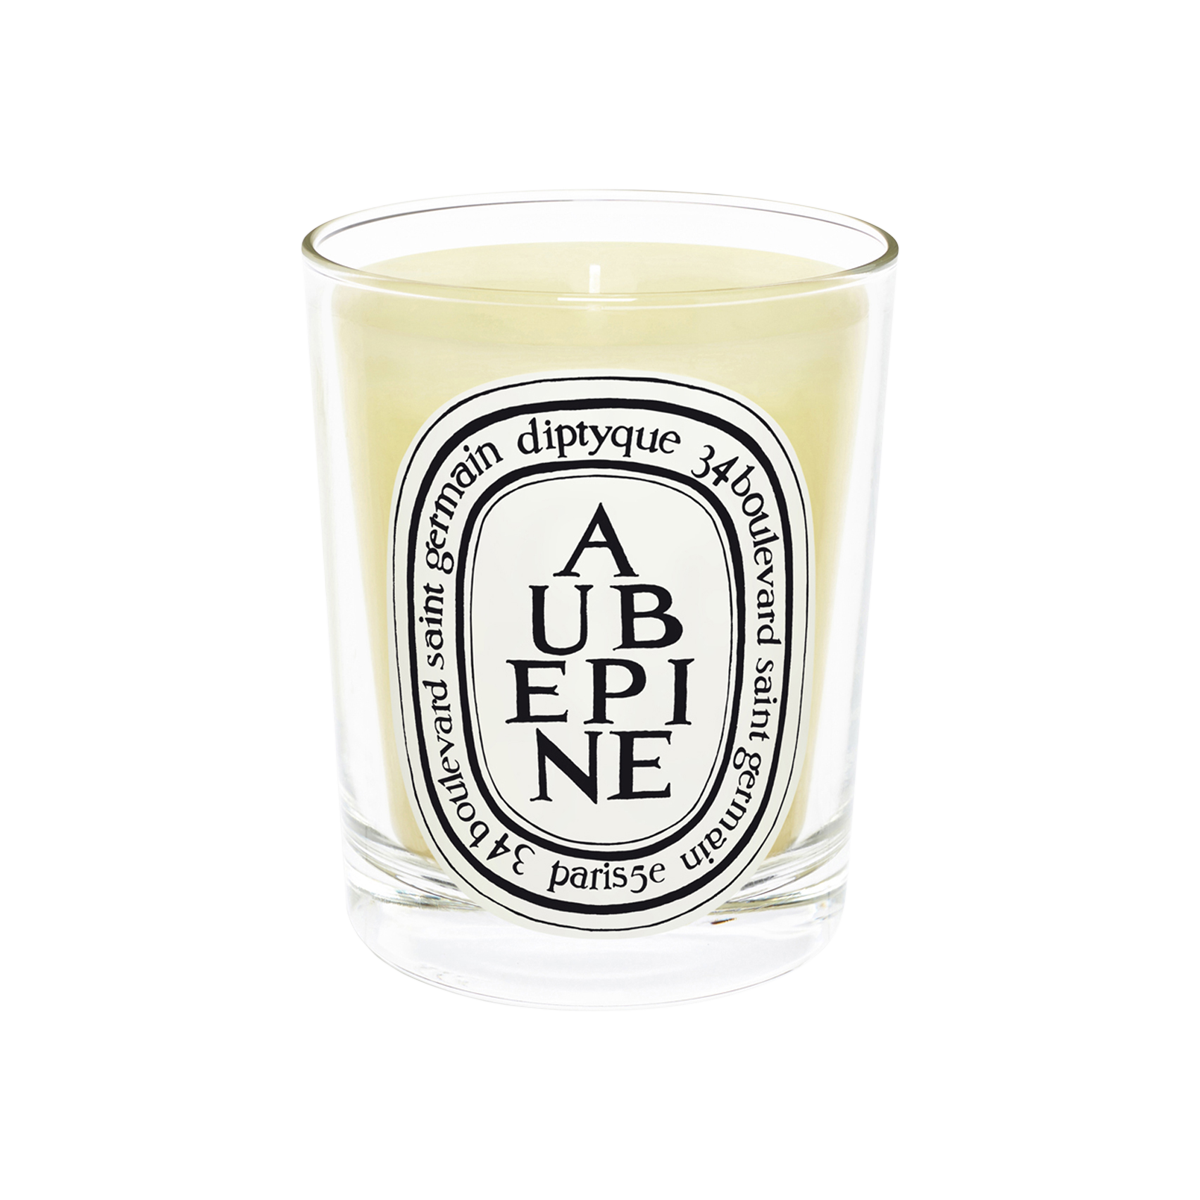 Diptyque - Aubepine Scented Candle